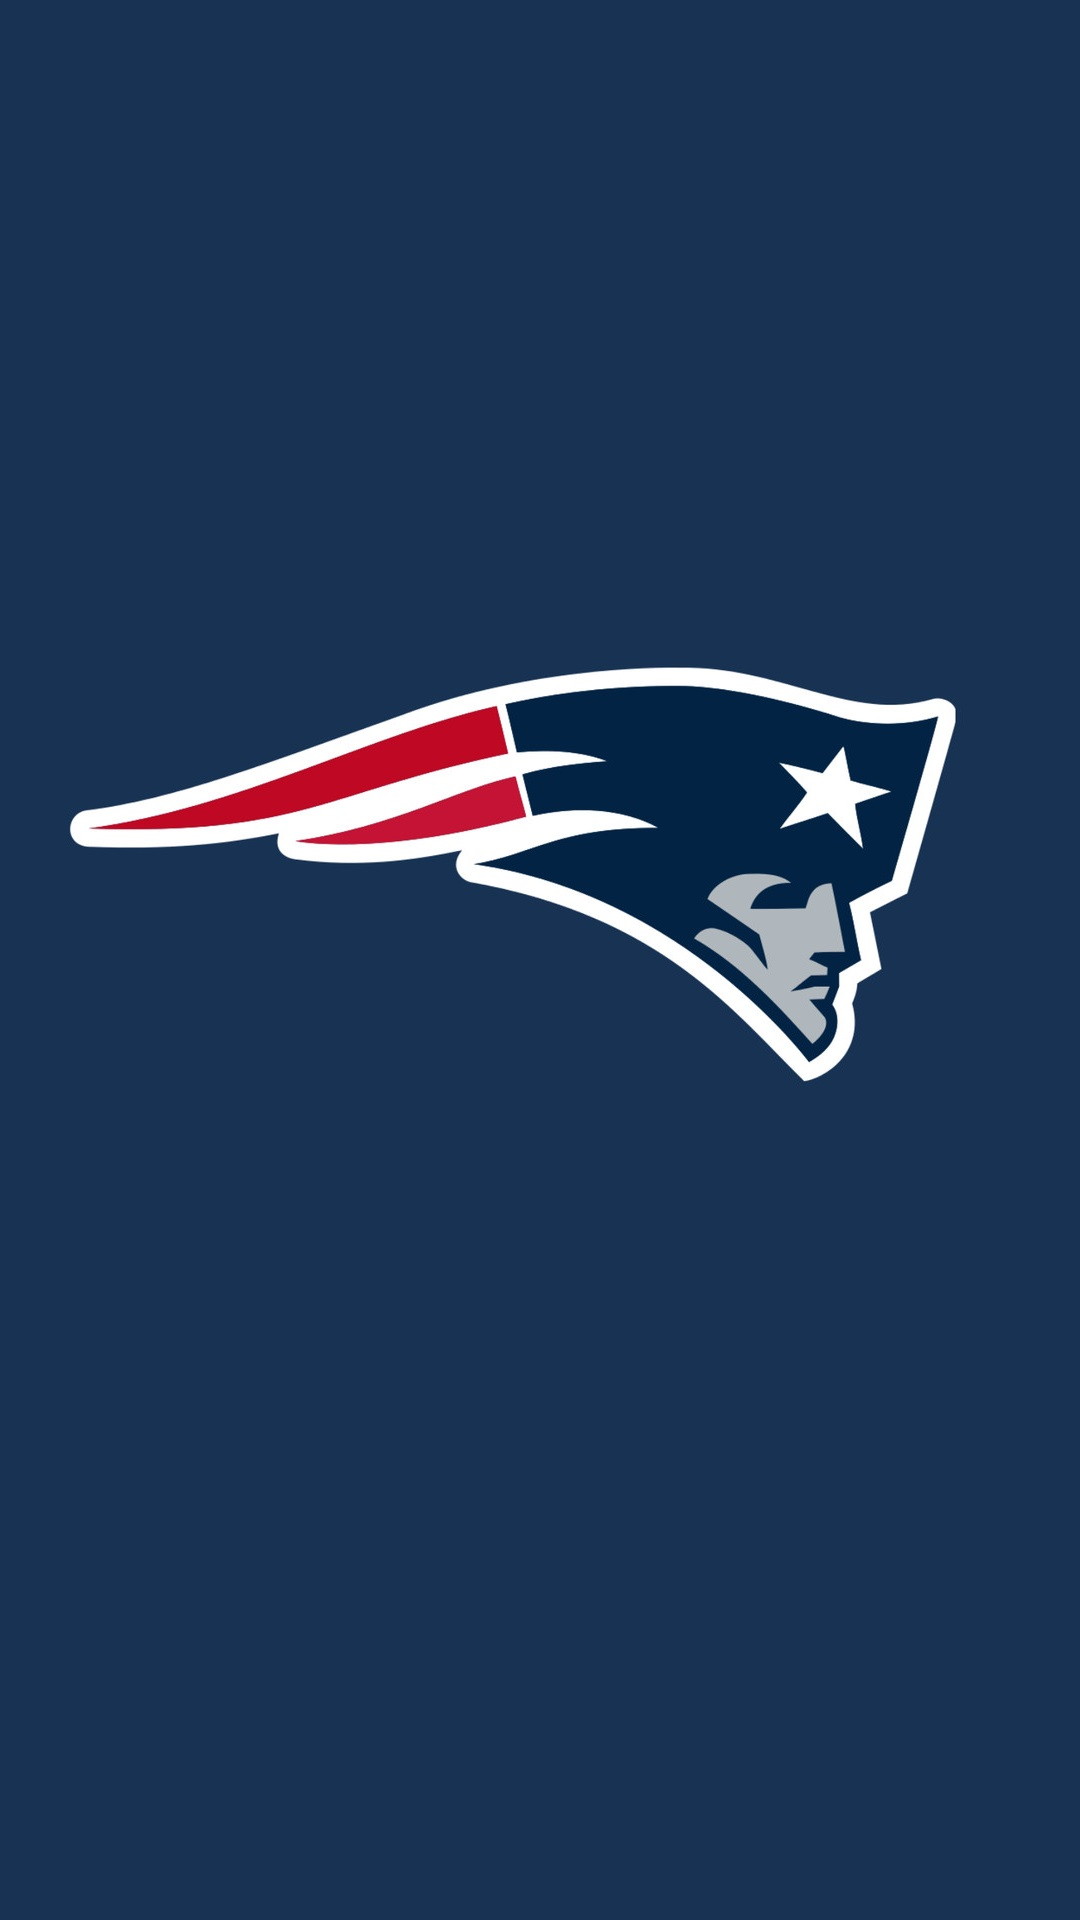 Patriots NFL Wallpaper Phone With high-resolution 1080X1920 pixel. You can use and set as wallpaper for Notebook Screensavers, Mac Wallpapers, Mobile Home Screen, iPhone or Android Phones Lock Screen